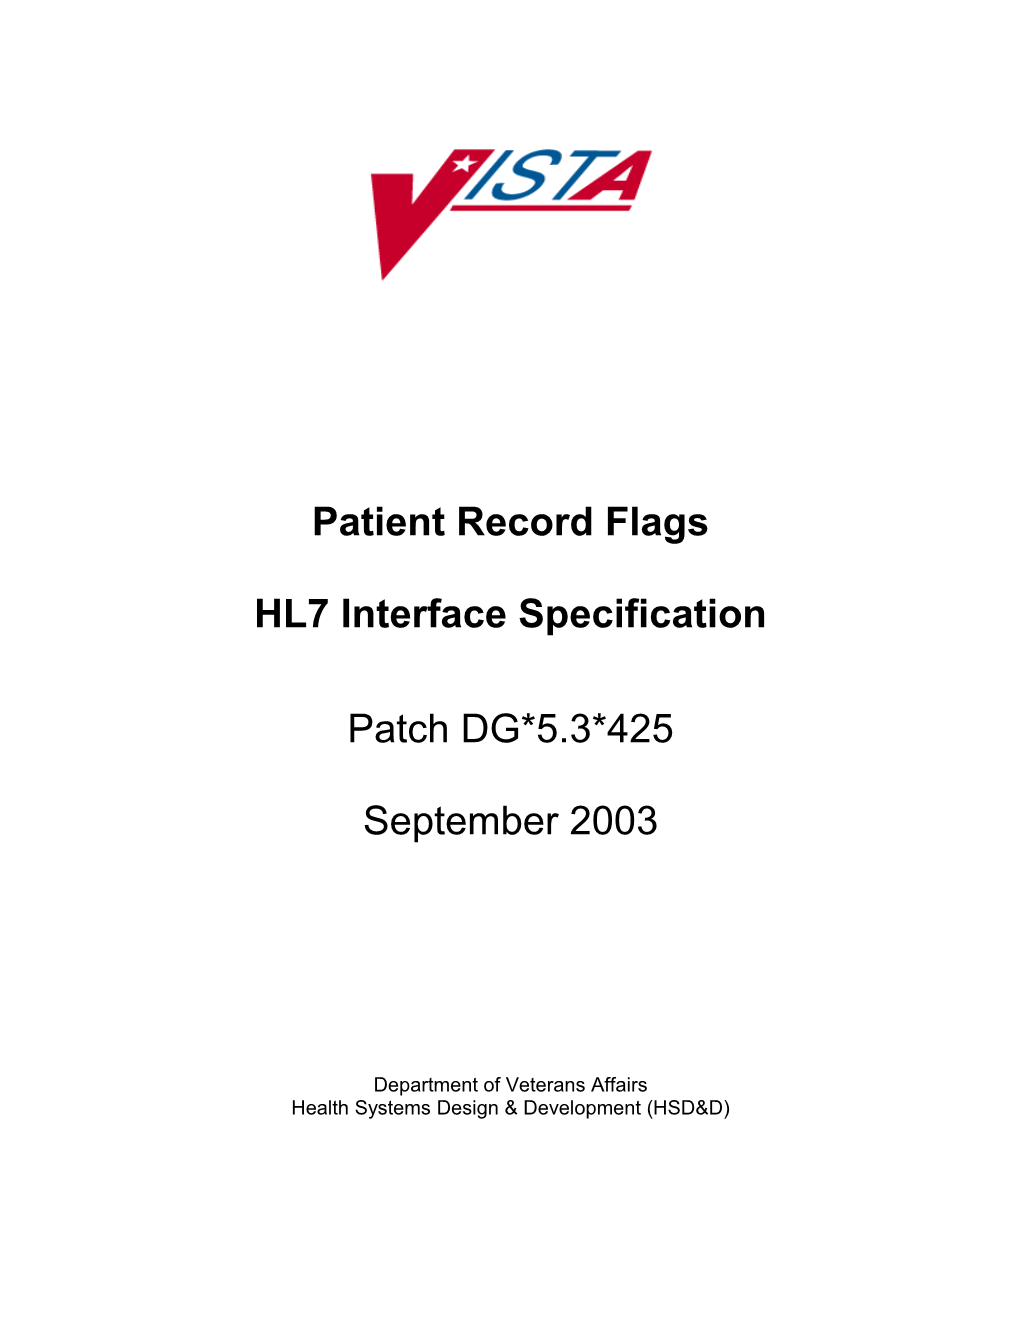 Patient Record Flags (PRF)